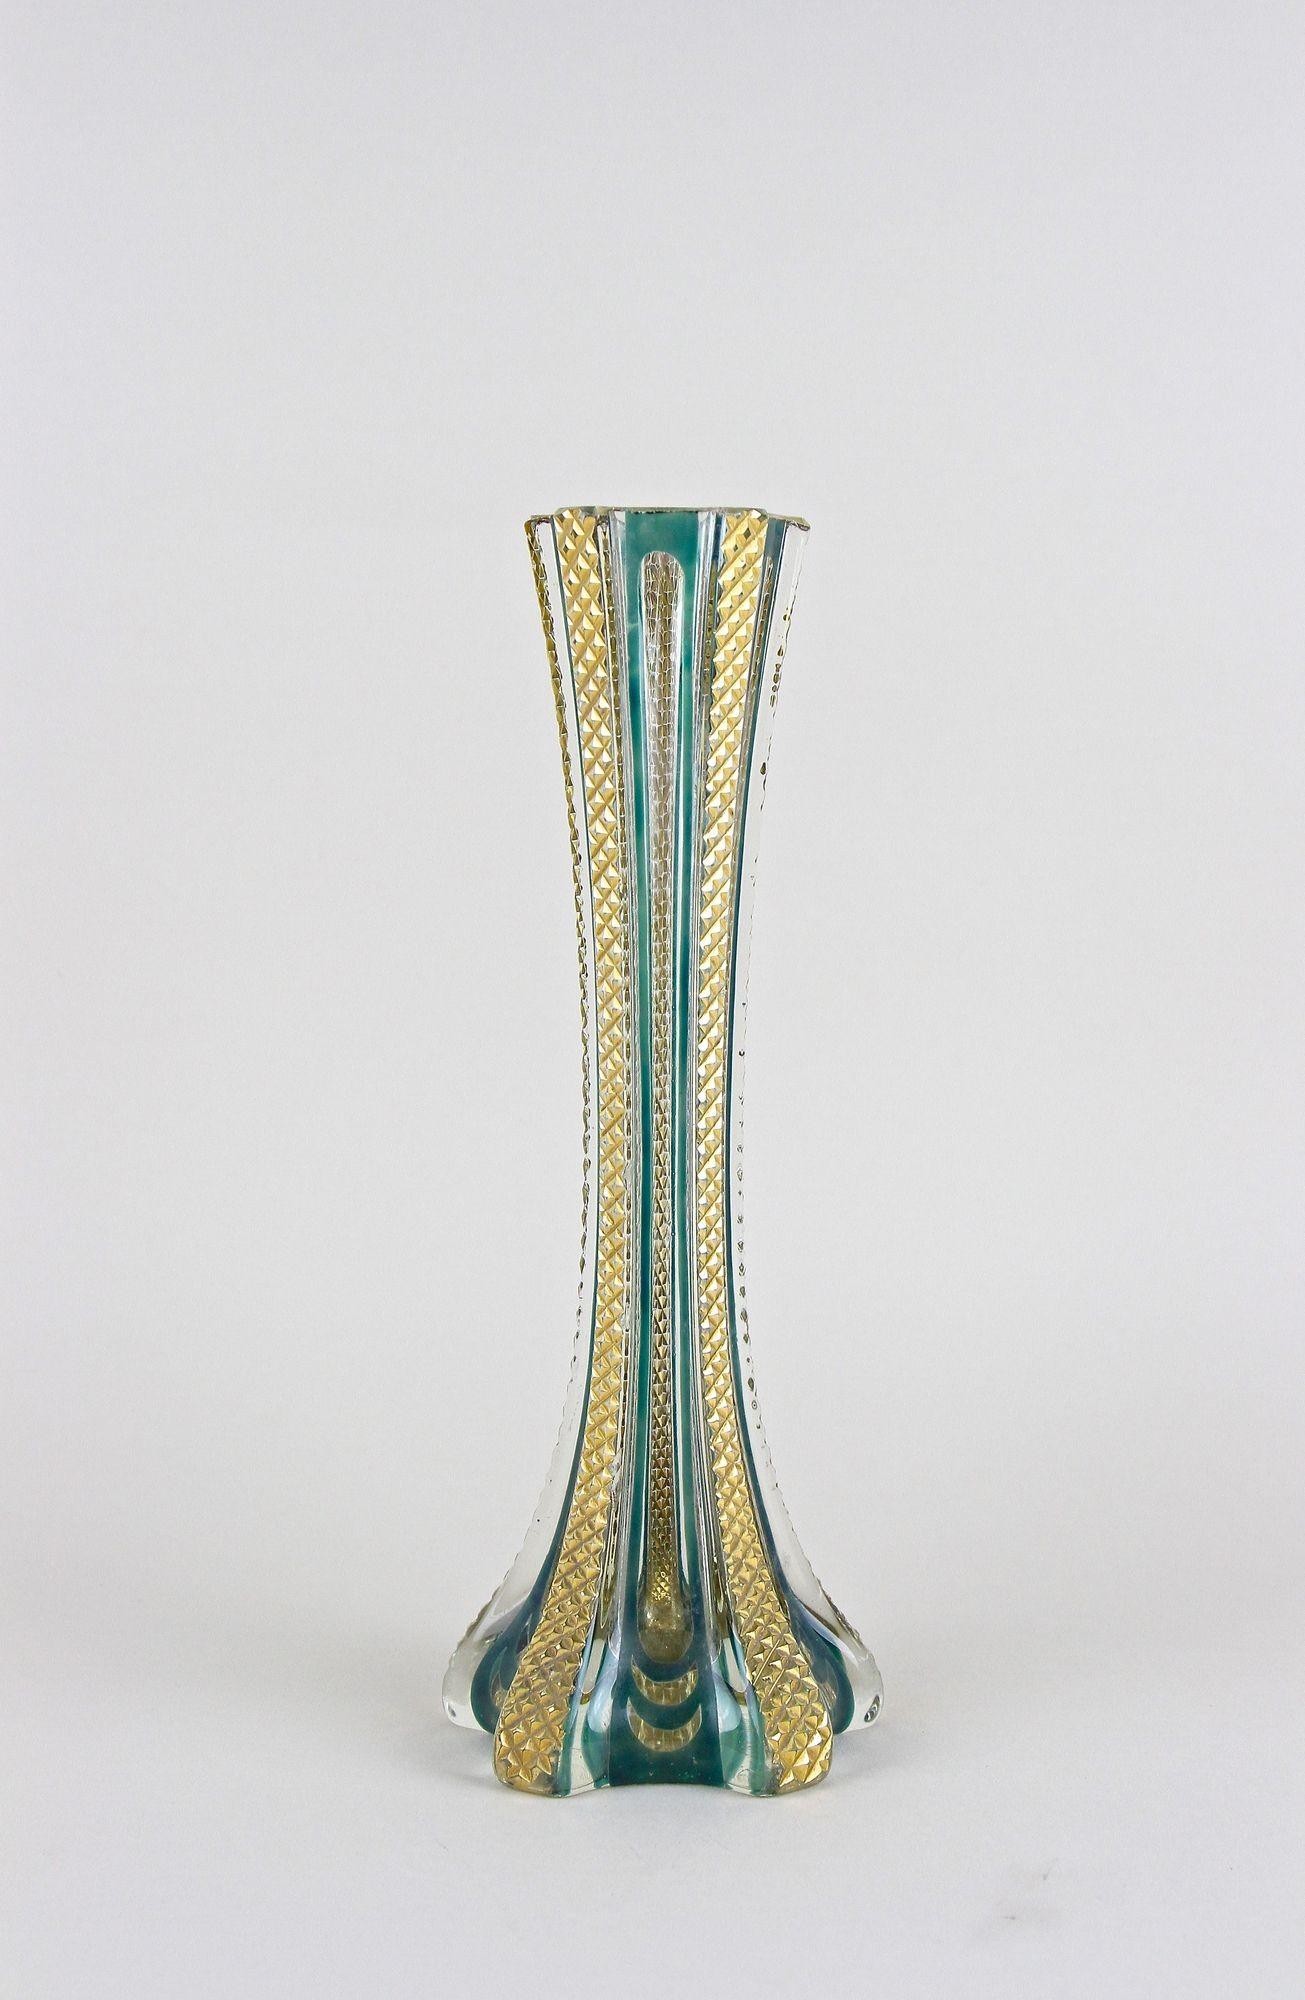 Murano Glass Vase With Gold Accents, Early 20th Century - Italy ca. 1930 For Sale 3